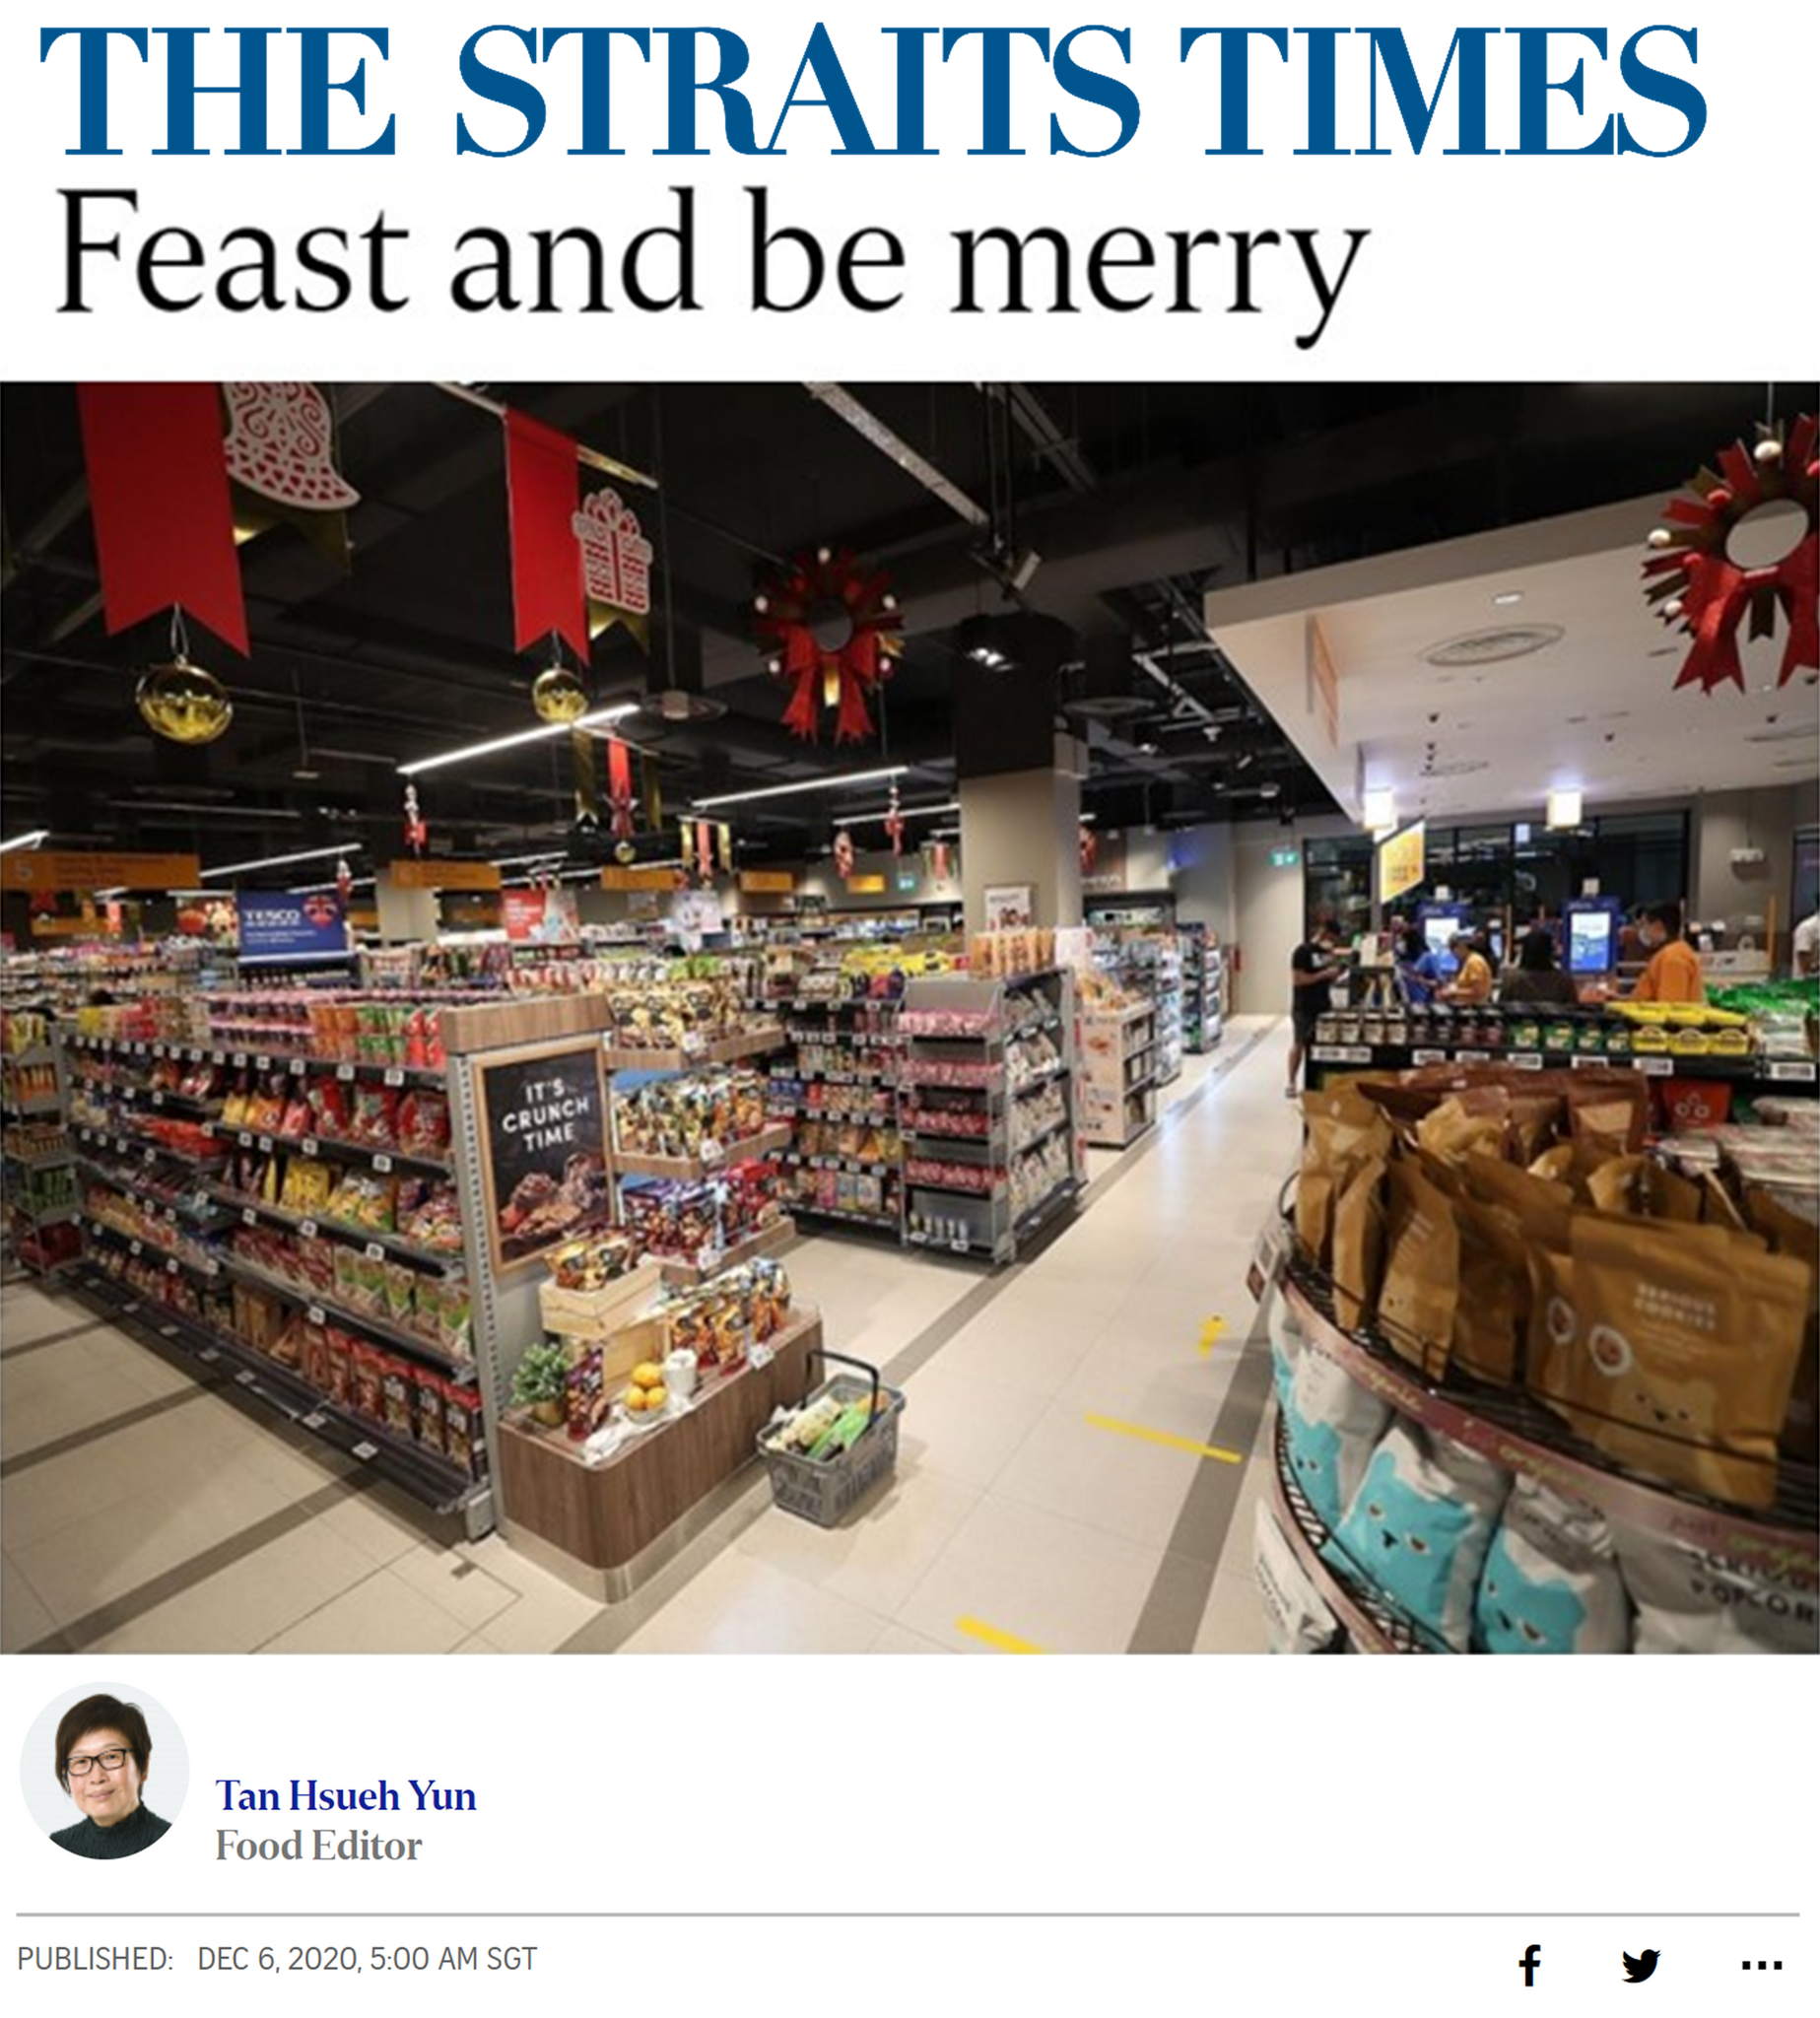 Straits times feast and be merry